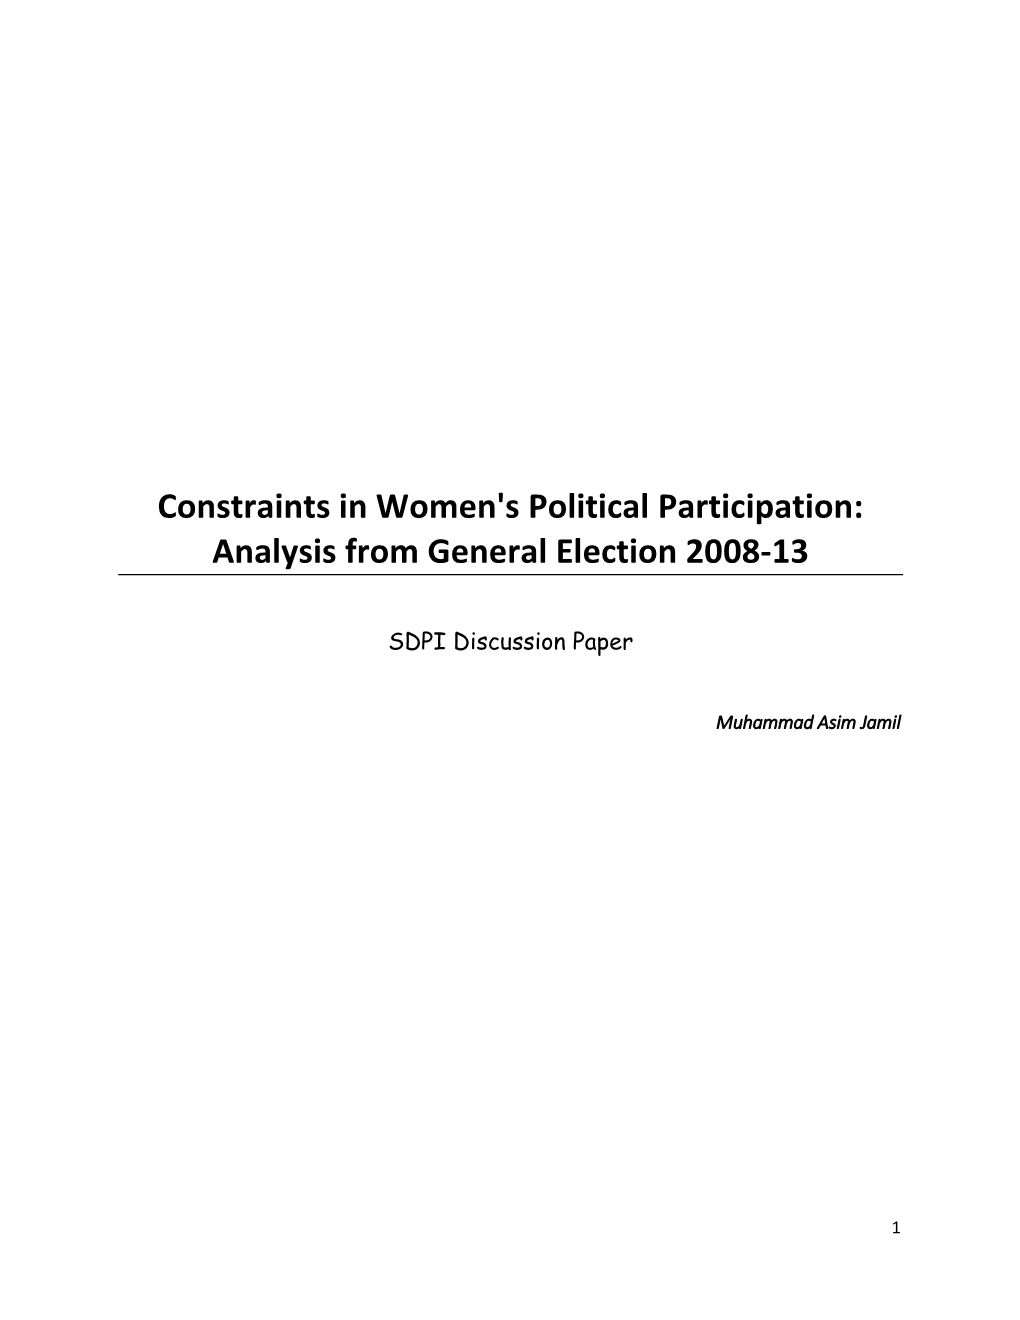 Constraints in Women's Political Participation: Analysis from General Election 2008-13